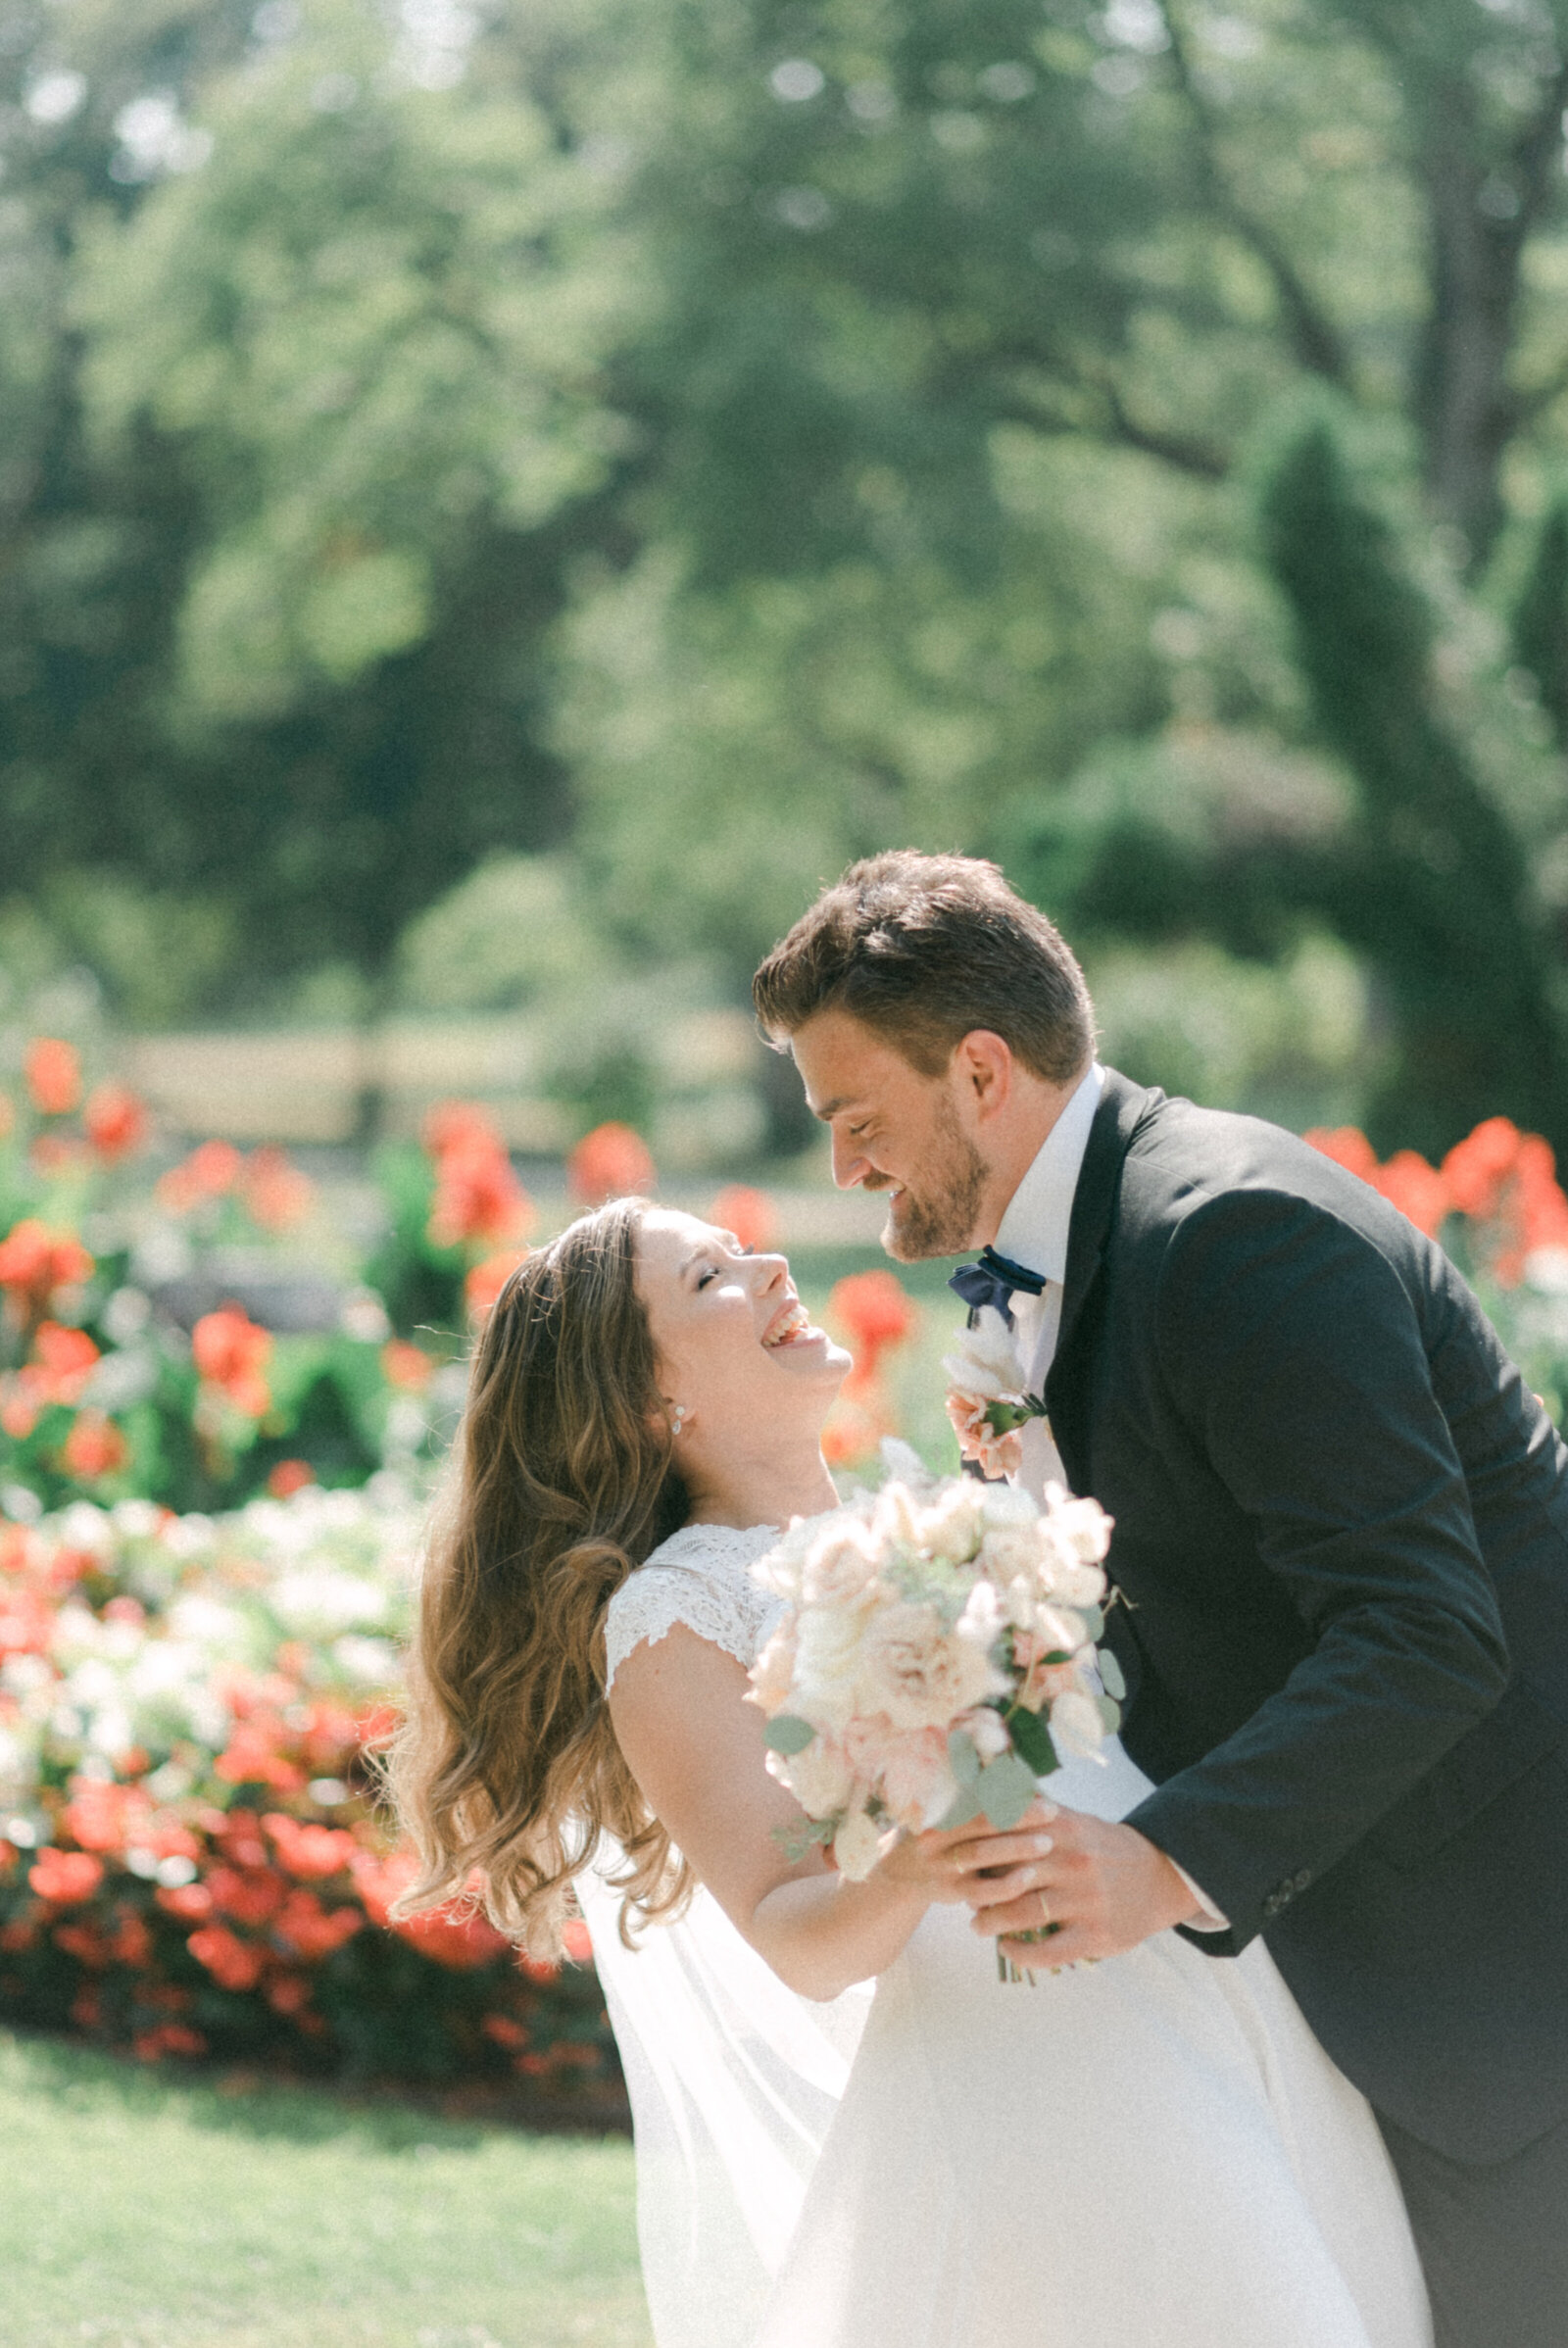 A wedding couple hugging and laughing in the garden during their wedding photo shoot with photographer Hannika Gabrielsson.